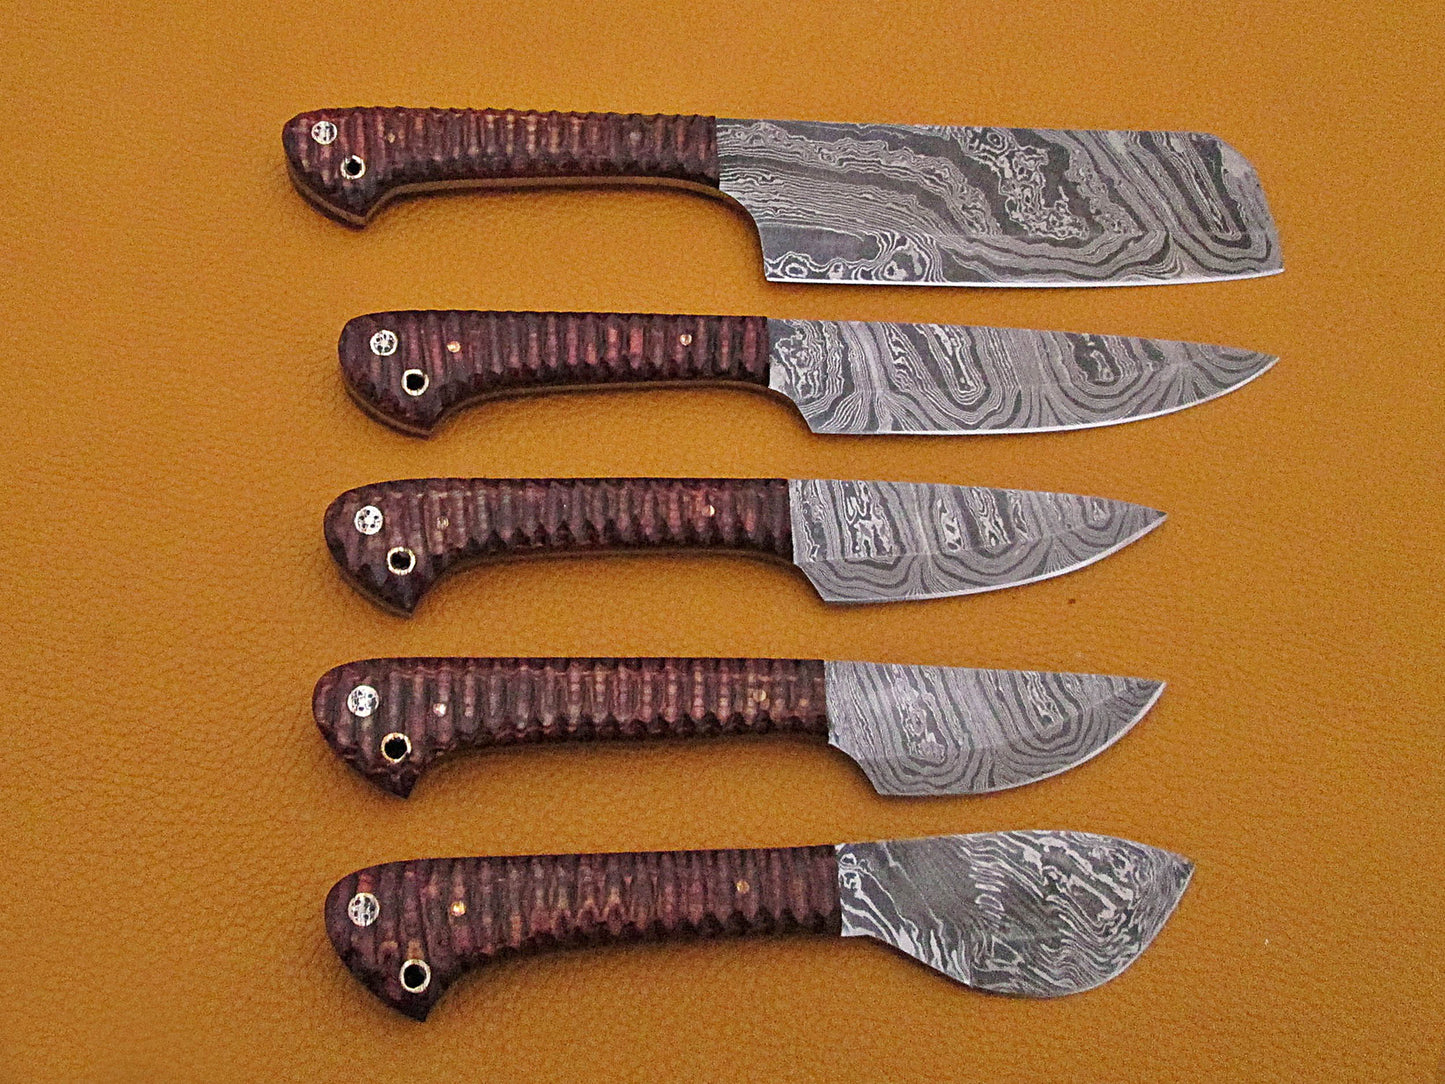 5 Pieces Damascus steel kitchen knife set includes (10.6+9.6+9.0+8.0+7.6)" knives in Brown Jigged wood scale, includes Roll able Leather suede sheath